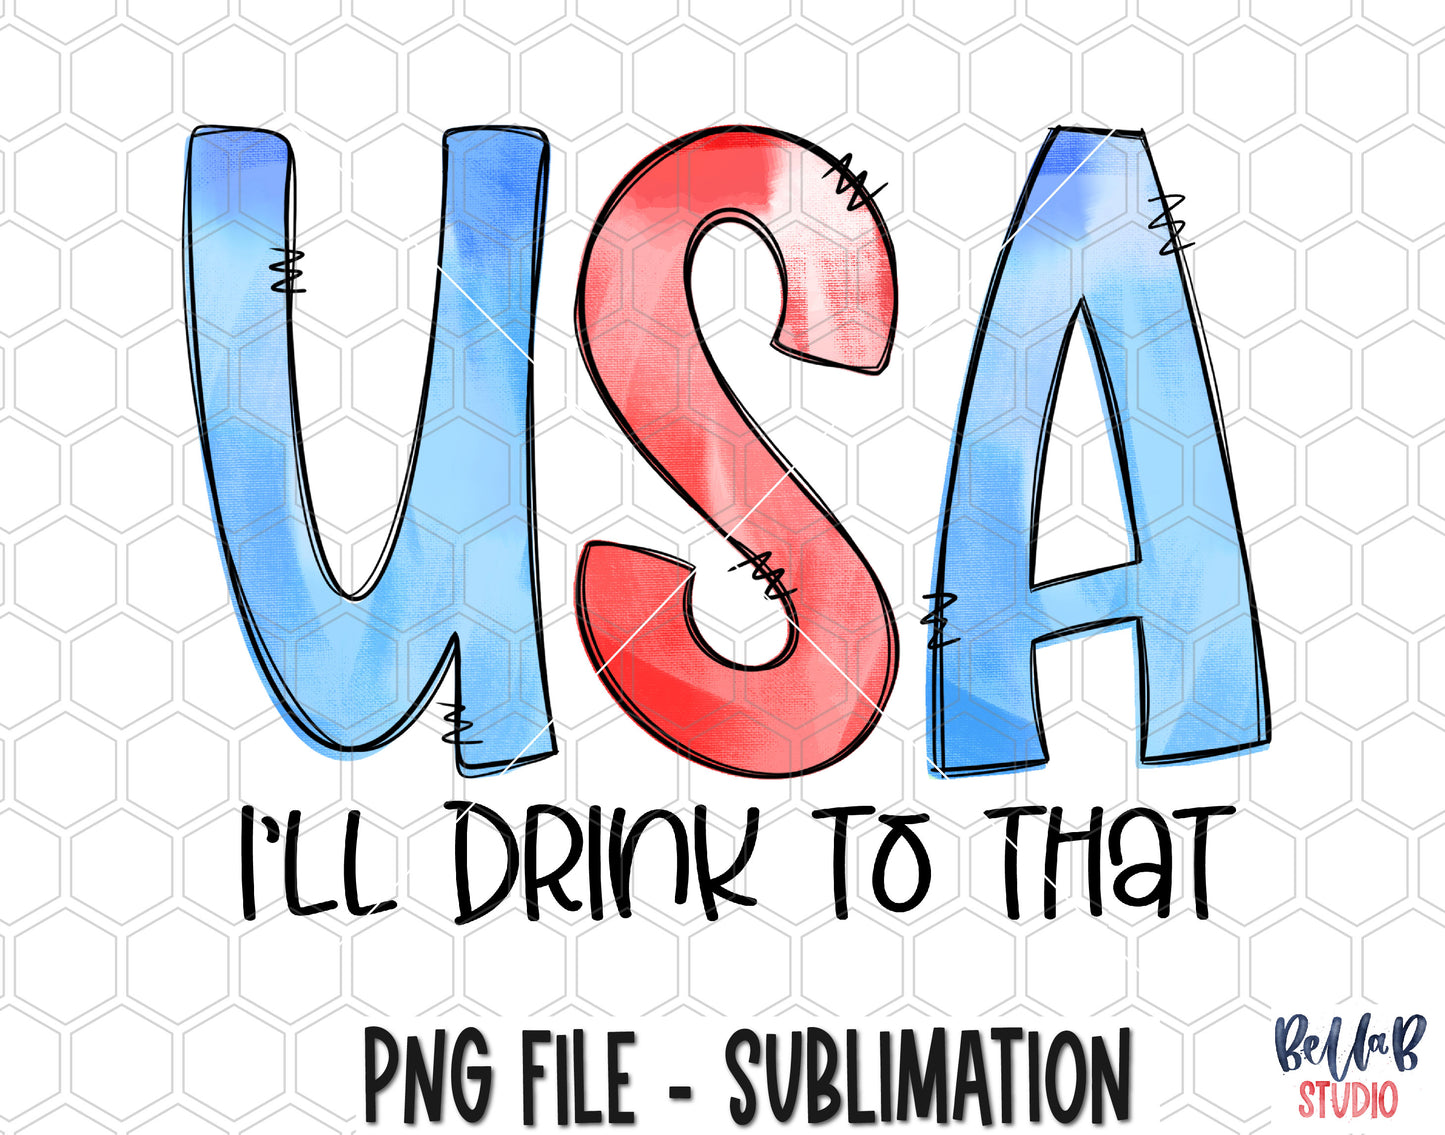 USA I'll Drink To That Sublimation Design